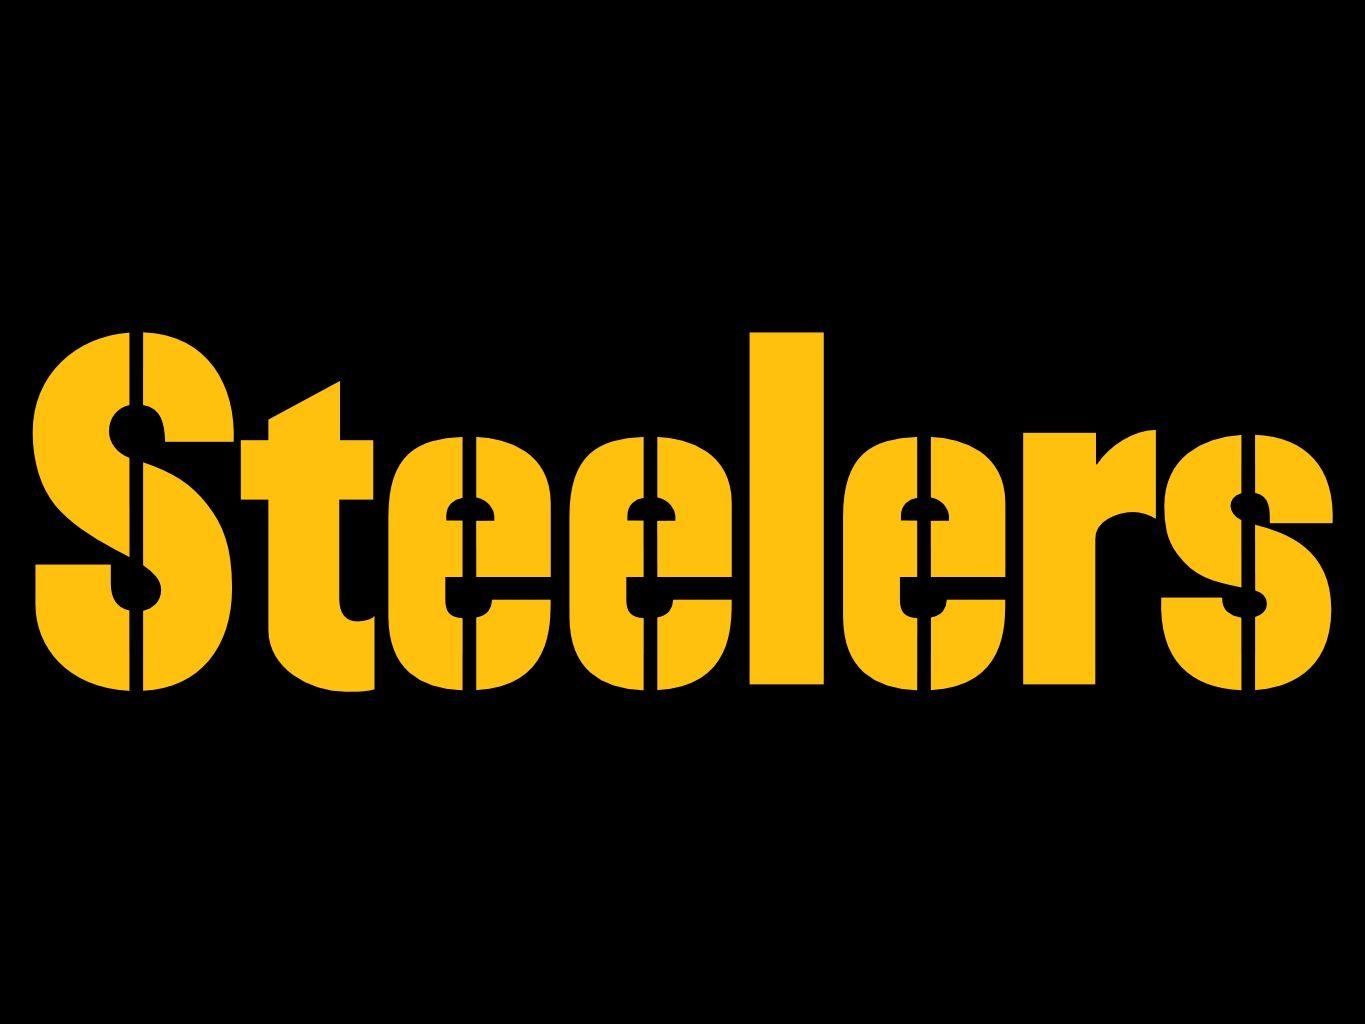 Black and Yellow Steelers Logo - Free Pittsburgh Steelers Logo, Download Free Clip Art, Free Clip Art ...